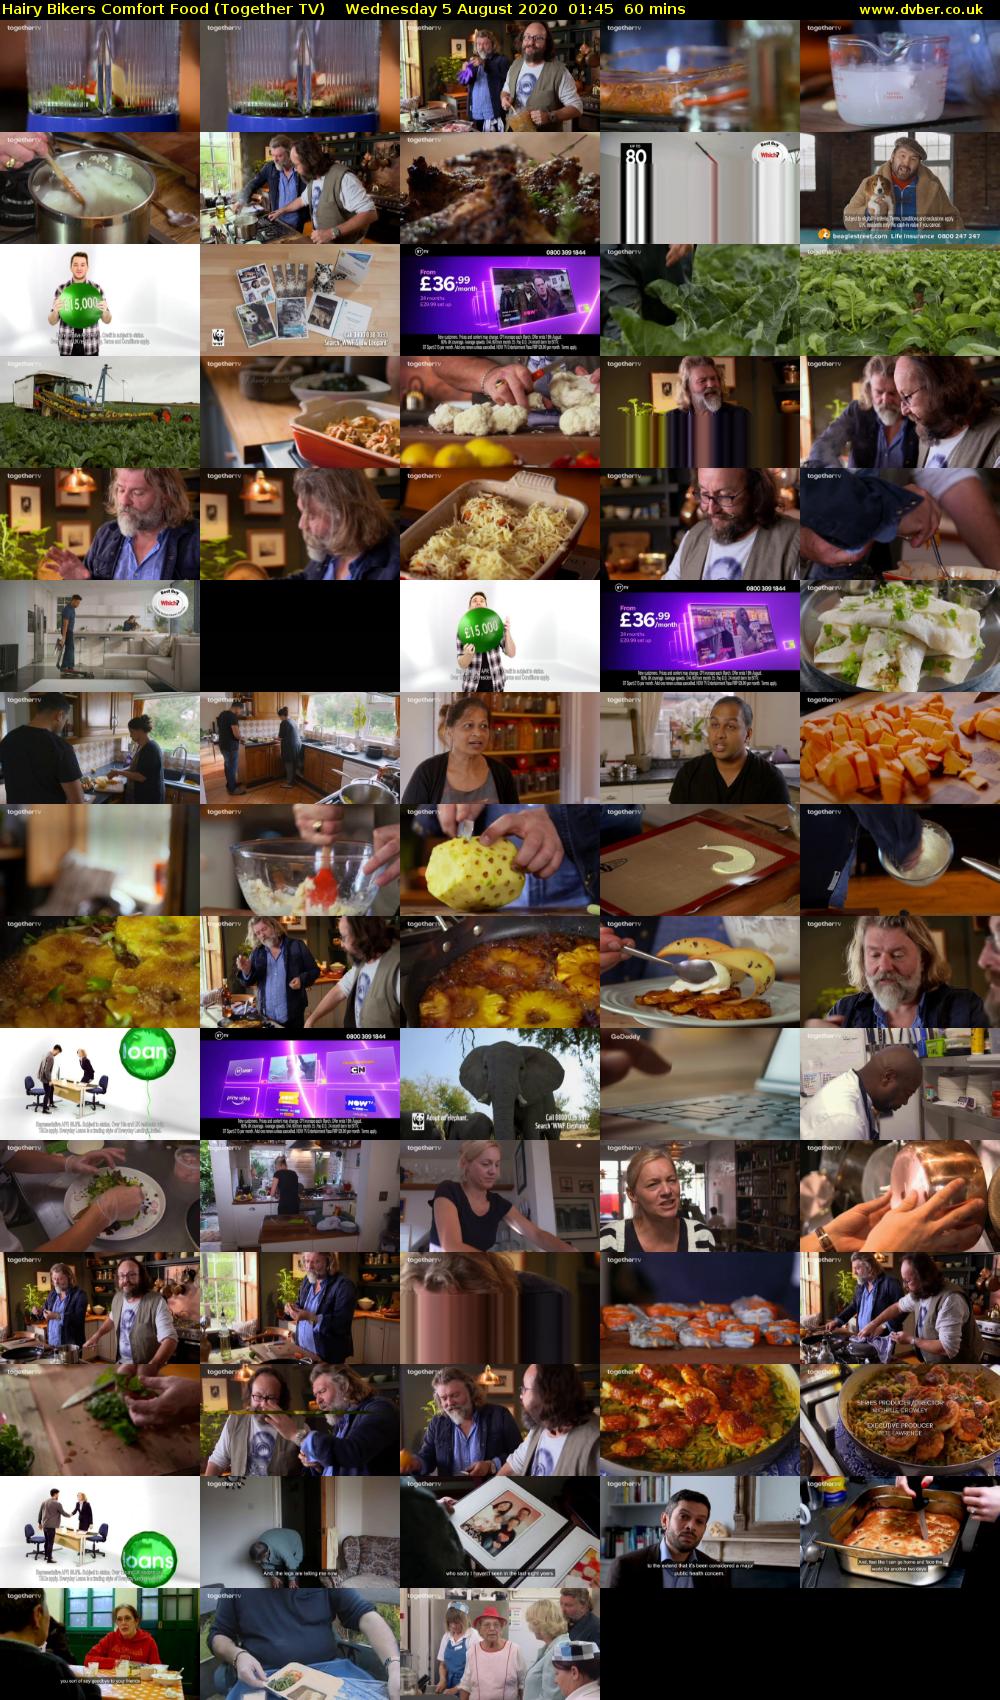 Hairy Bikers Comfort Food (Together TV) Wednesday 5 August 2020 01:45 - 02:45